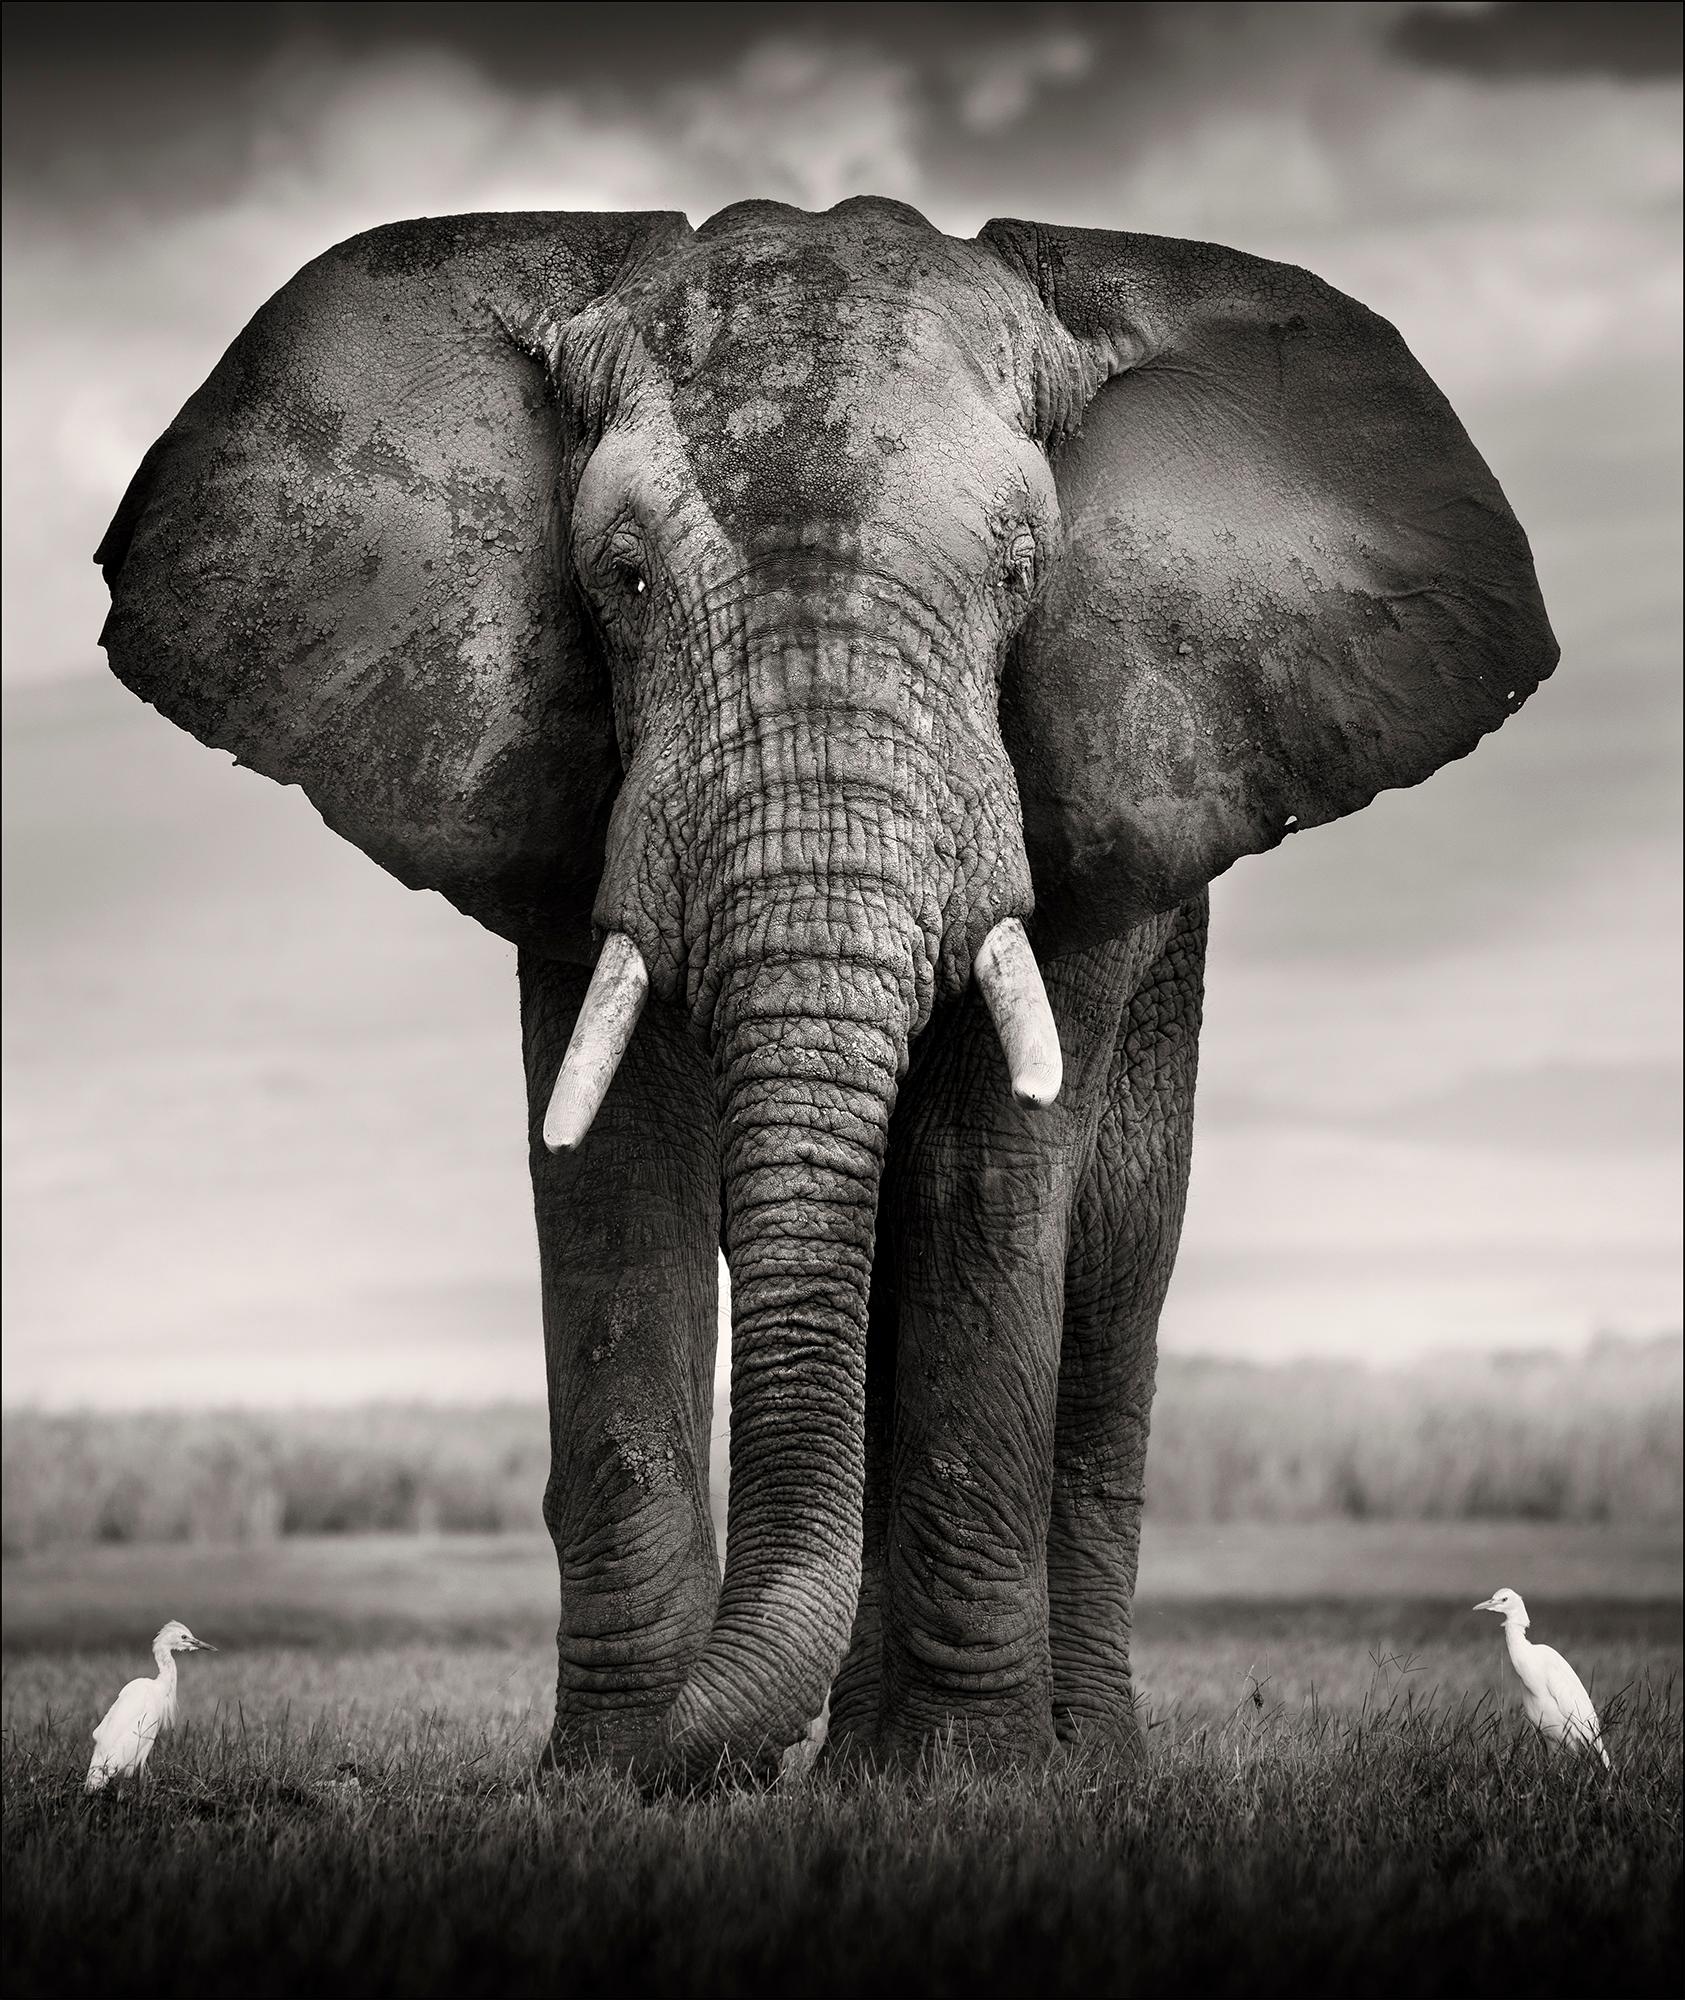 Bull with two Birds, Platinum, animal, elephant, black and white photography - Photograph by Joachim Schmeisser